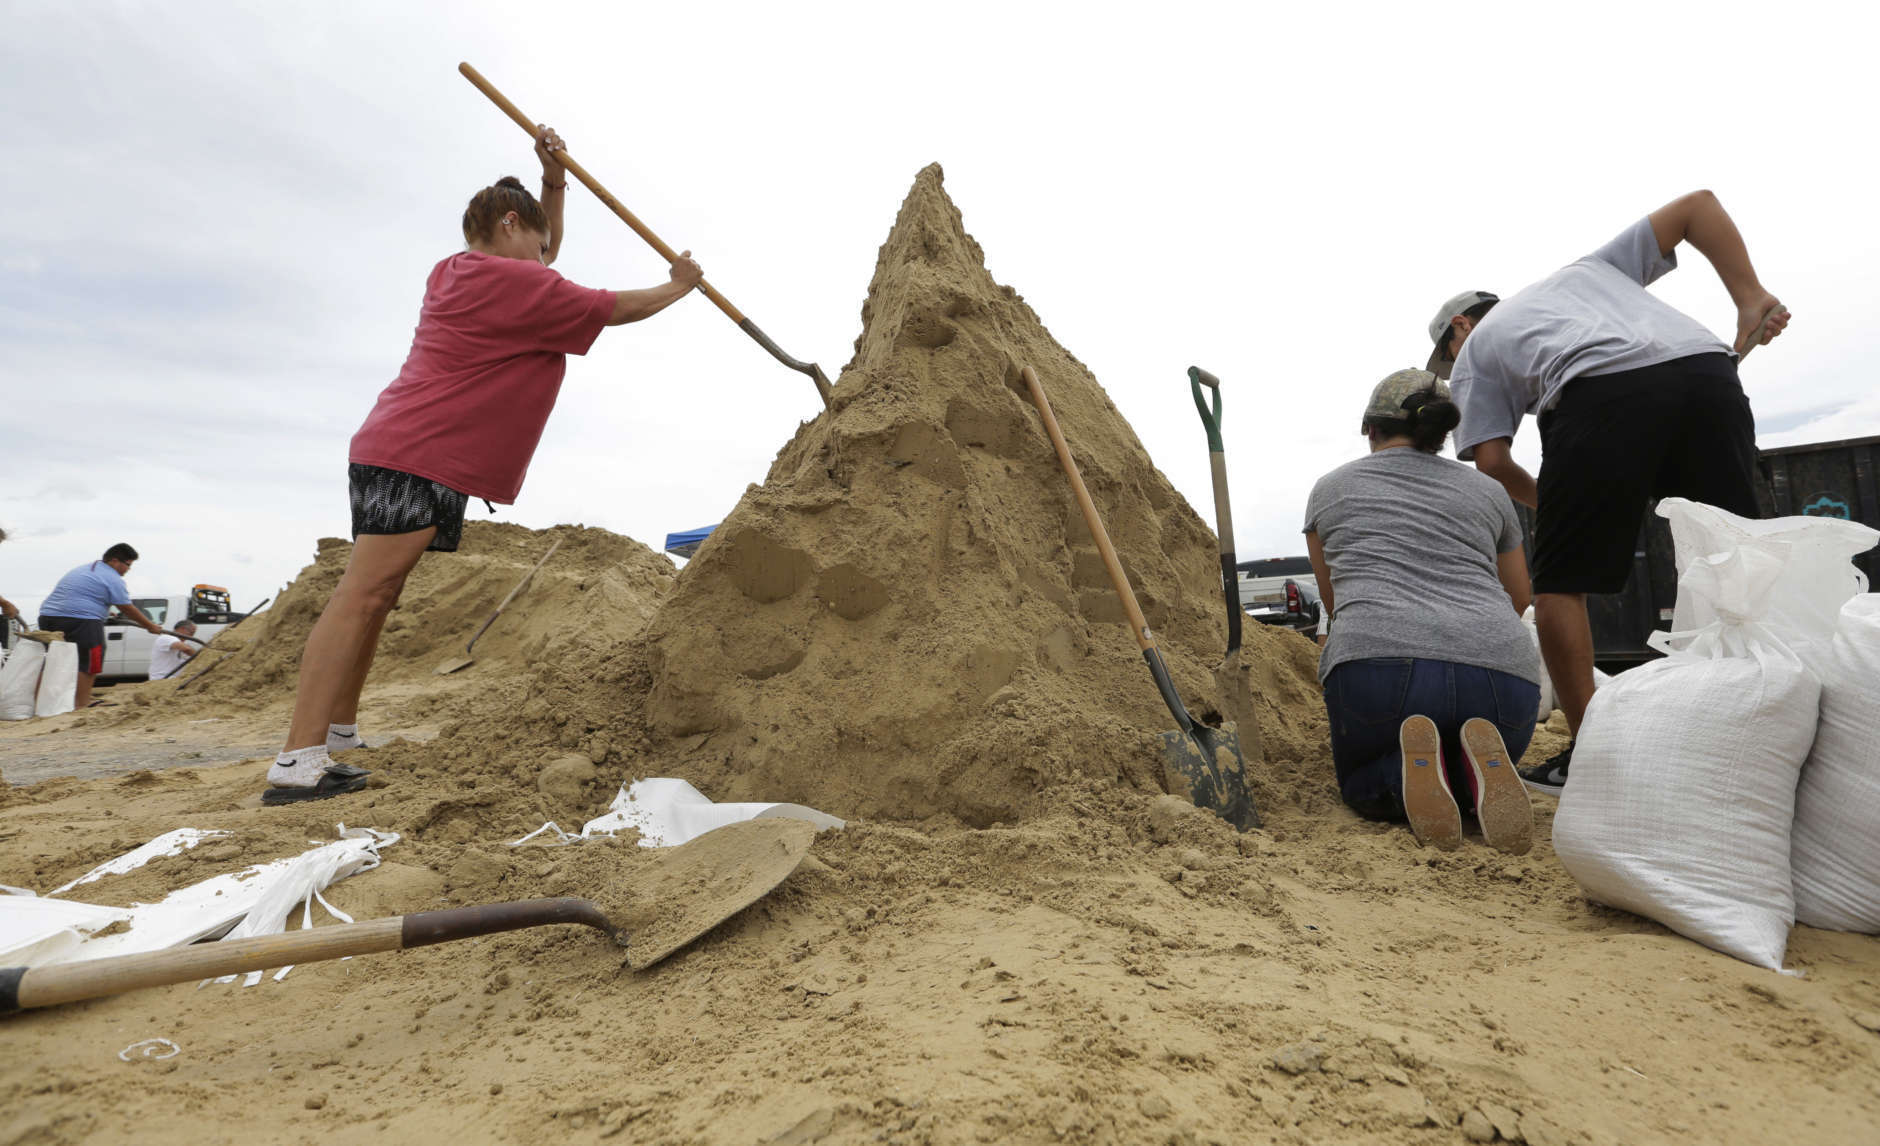 Residents fill sand bags as they prepare for Hurricane Harvey, Thursday, Aug. 24, 2017, in Corpus Christi, Texas.  Two counties have ordered mandatory evacuations as Hurricane Harvey gathers strength as it drifts toward the Texas Gulf Coast.   (AP Photo/Eric Gay)